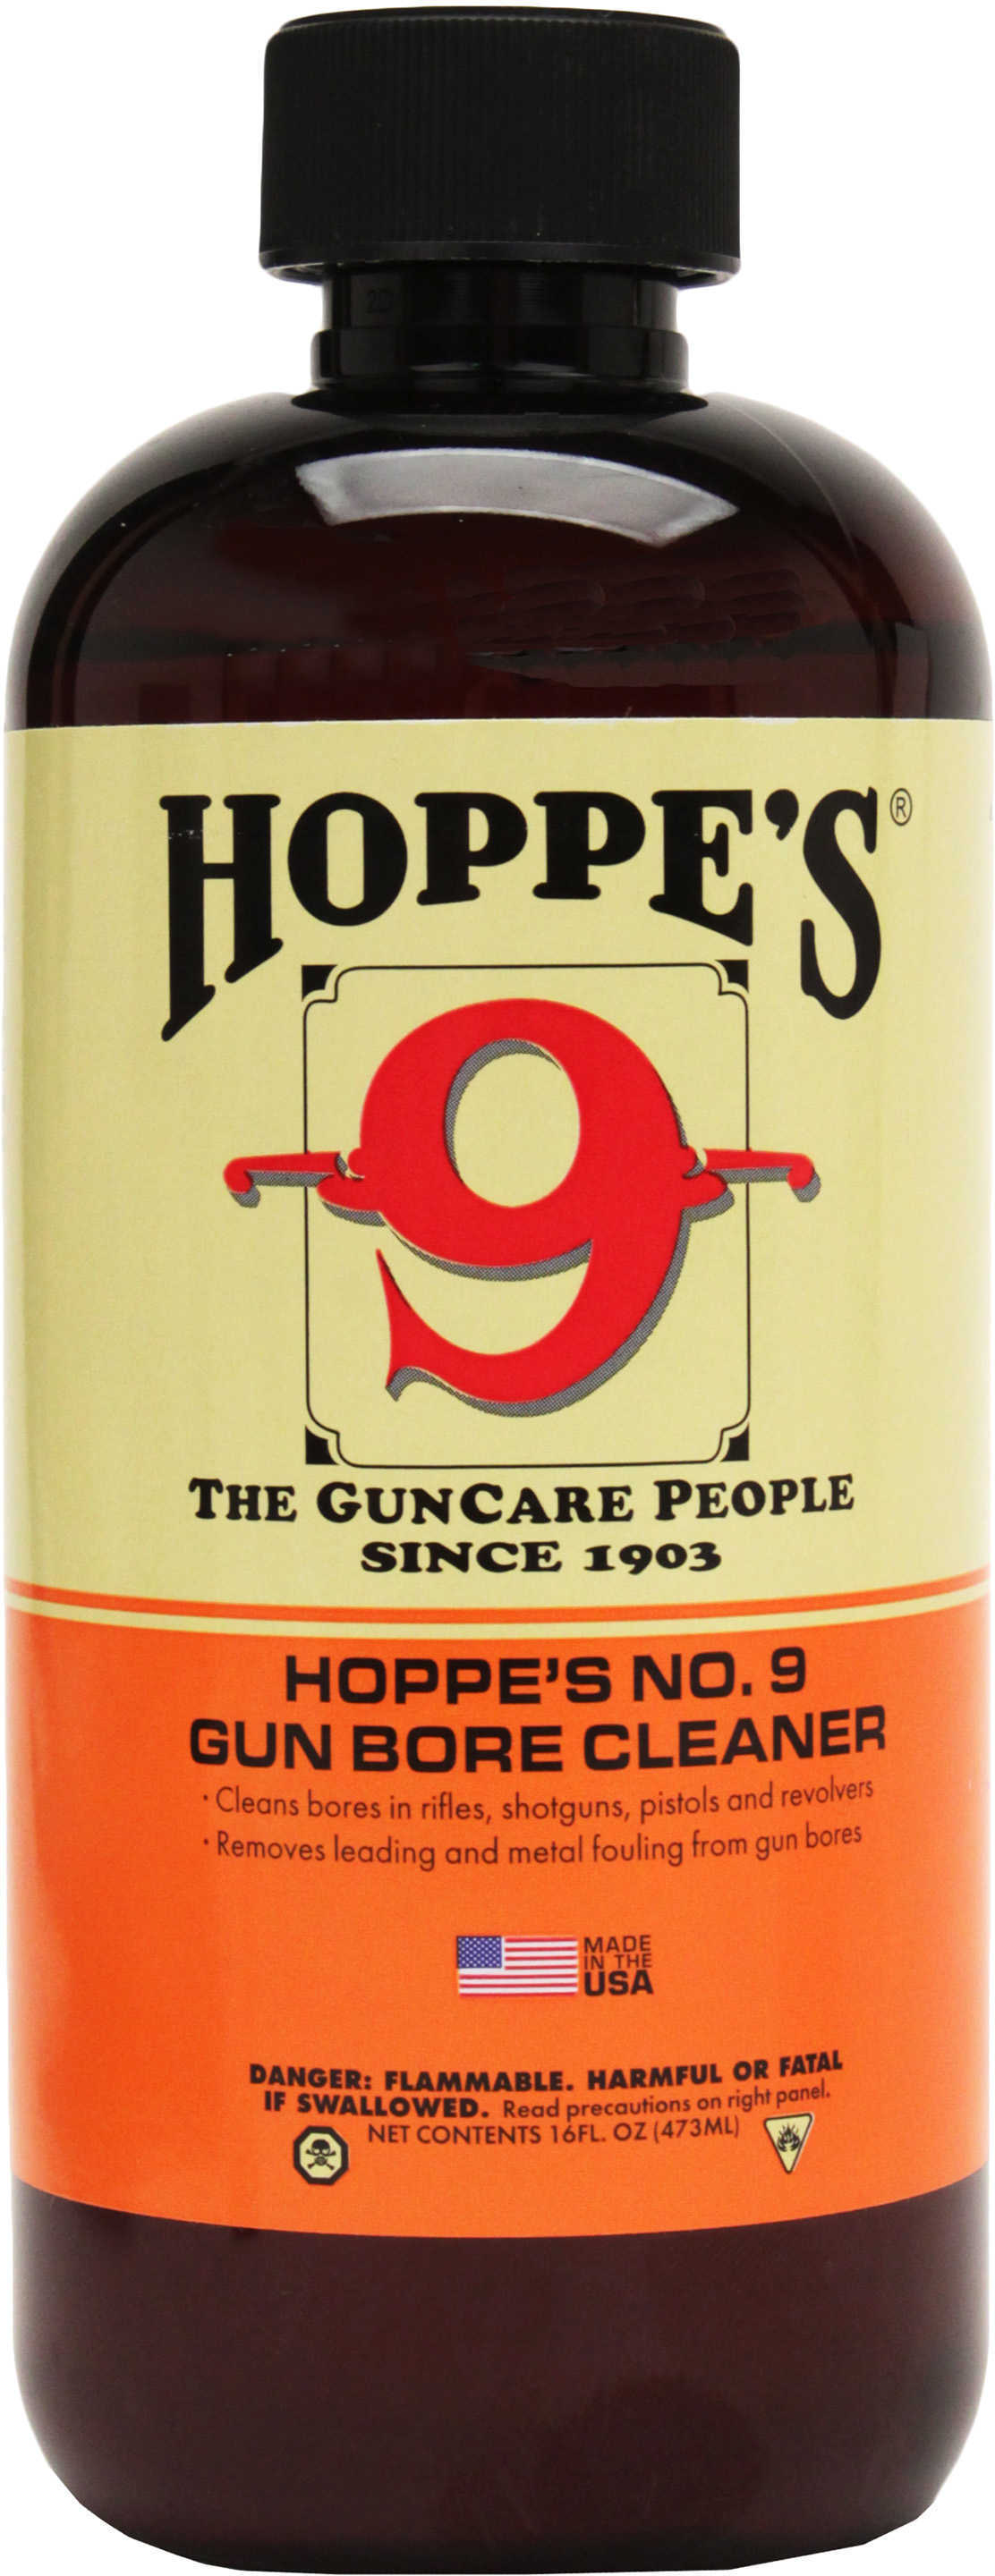 Hoppes Famous No. 9 Solvent - Pint Remains The Best-Known Remover Of Powder Lead Metal Fouling & Rust Quick Super-